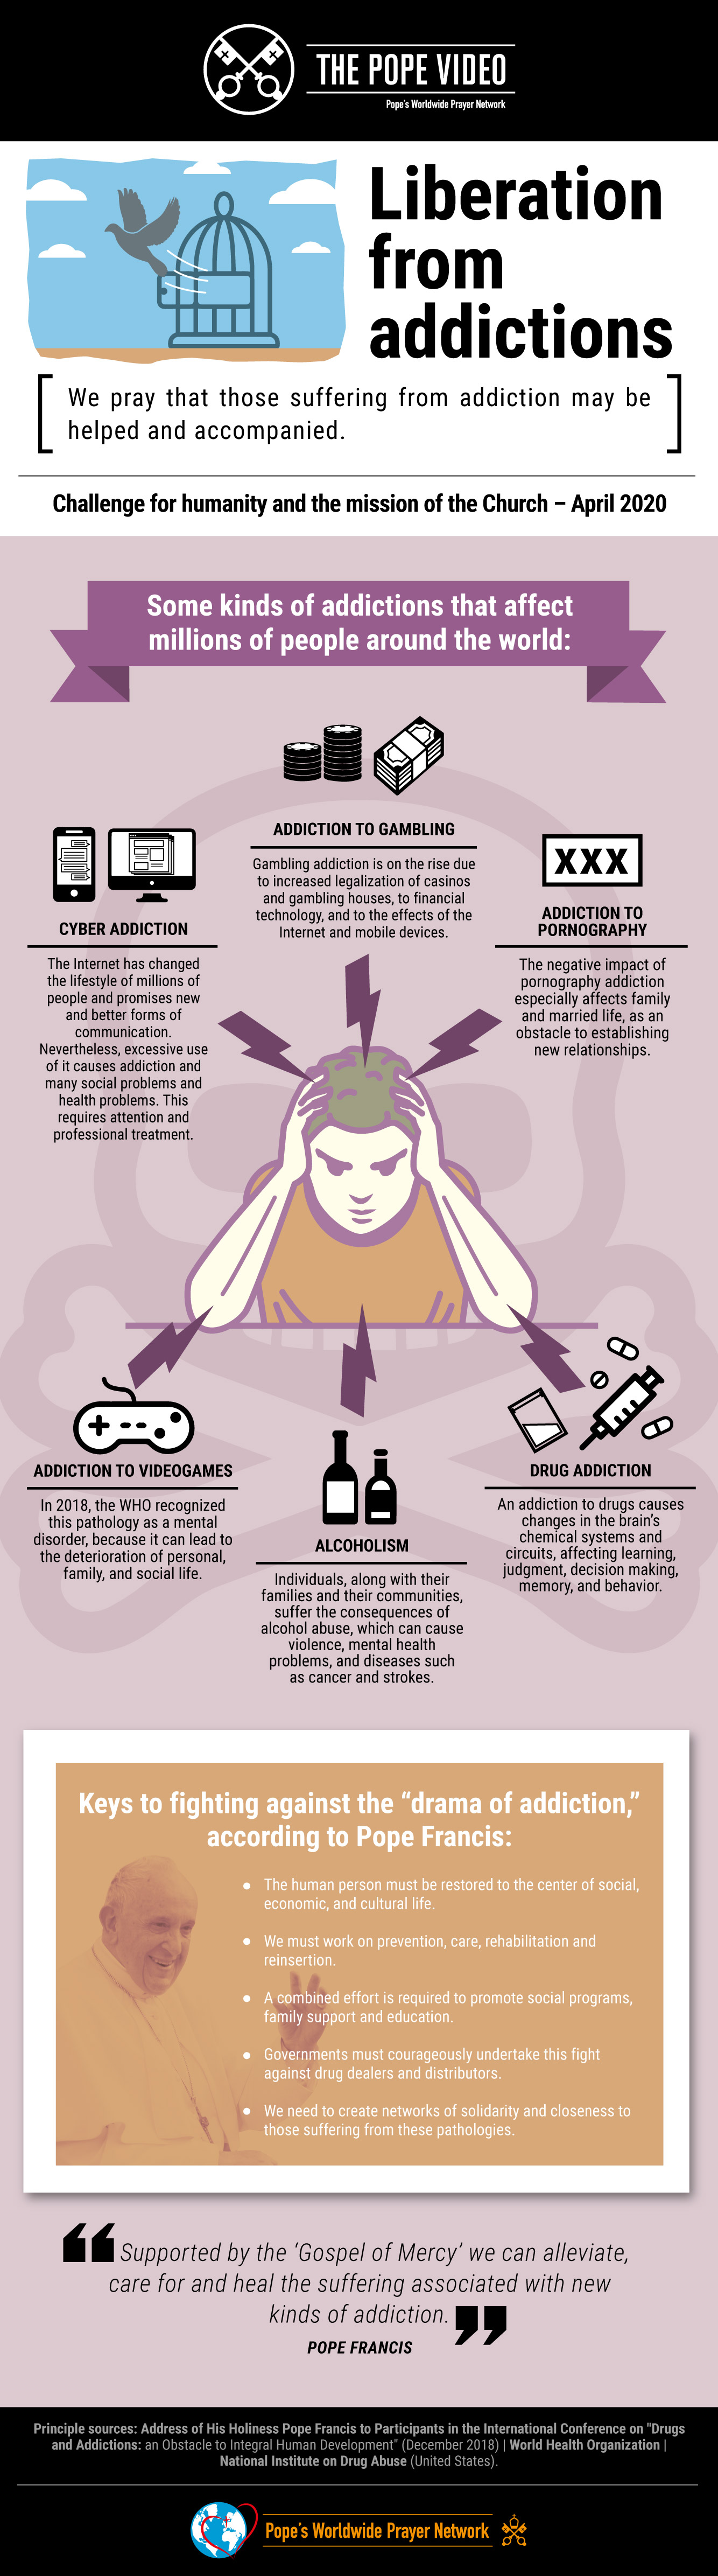 infographic-tpv-4-2020-en-the-pope-video-liberation-from-addictions.jpg